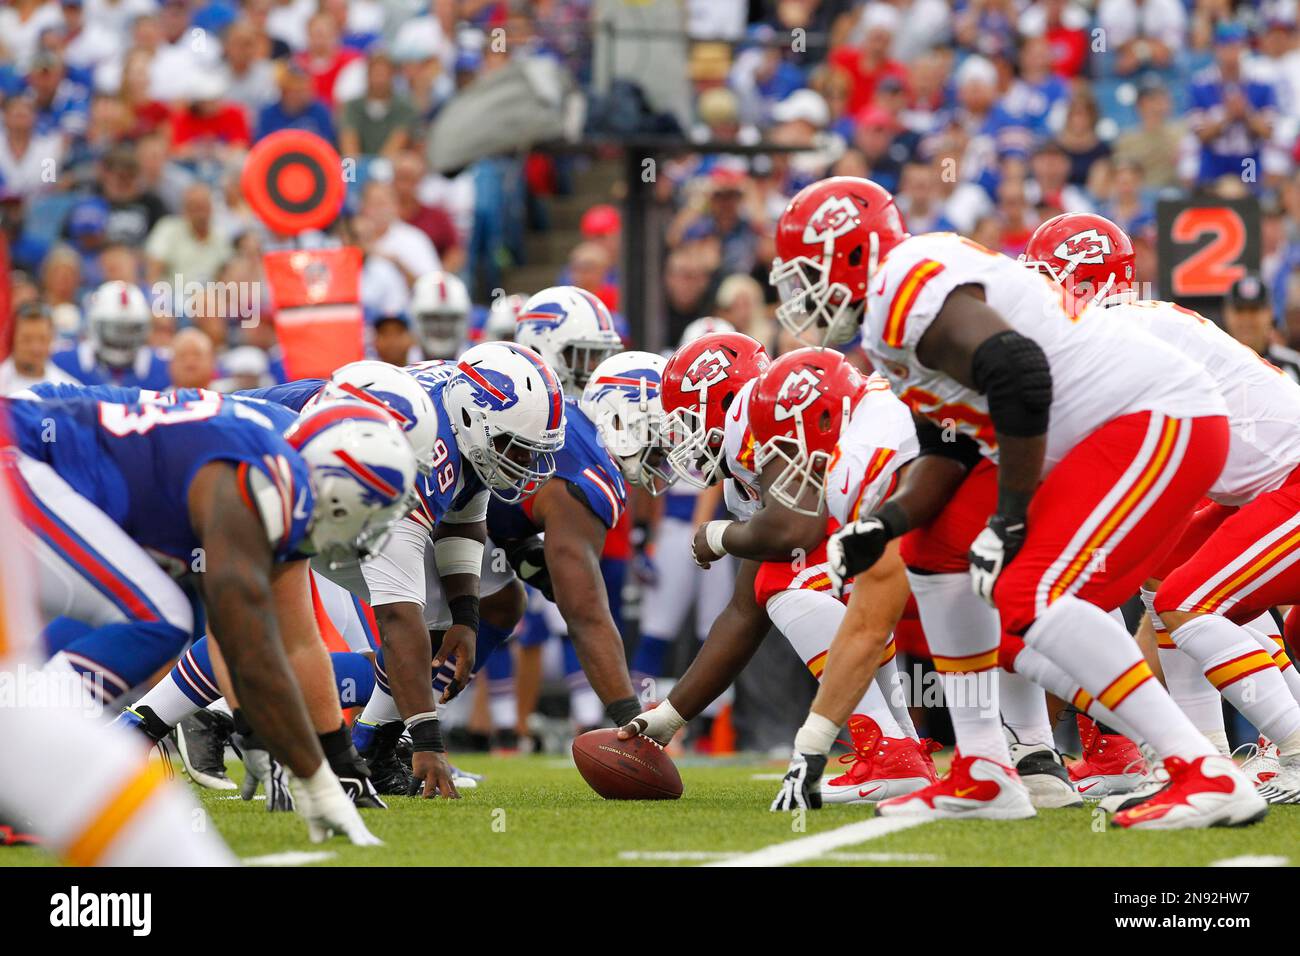 Buffalo Bills at the line of scrimmage against the Kansas City Chiefs  during the first half of an NFL football game in Orchard Park, N.Y.,  Sunday, Sept. 16, 2012. (AP Photo/Bill Wippert